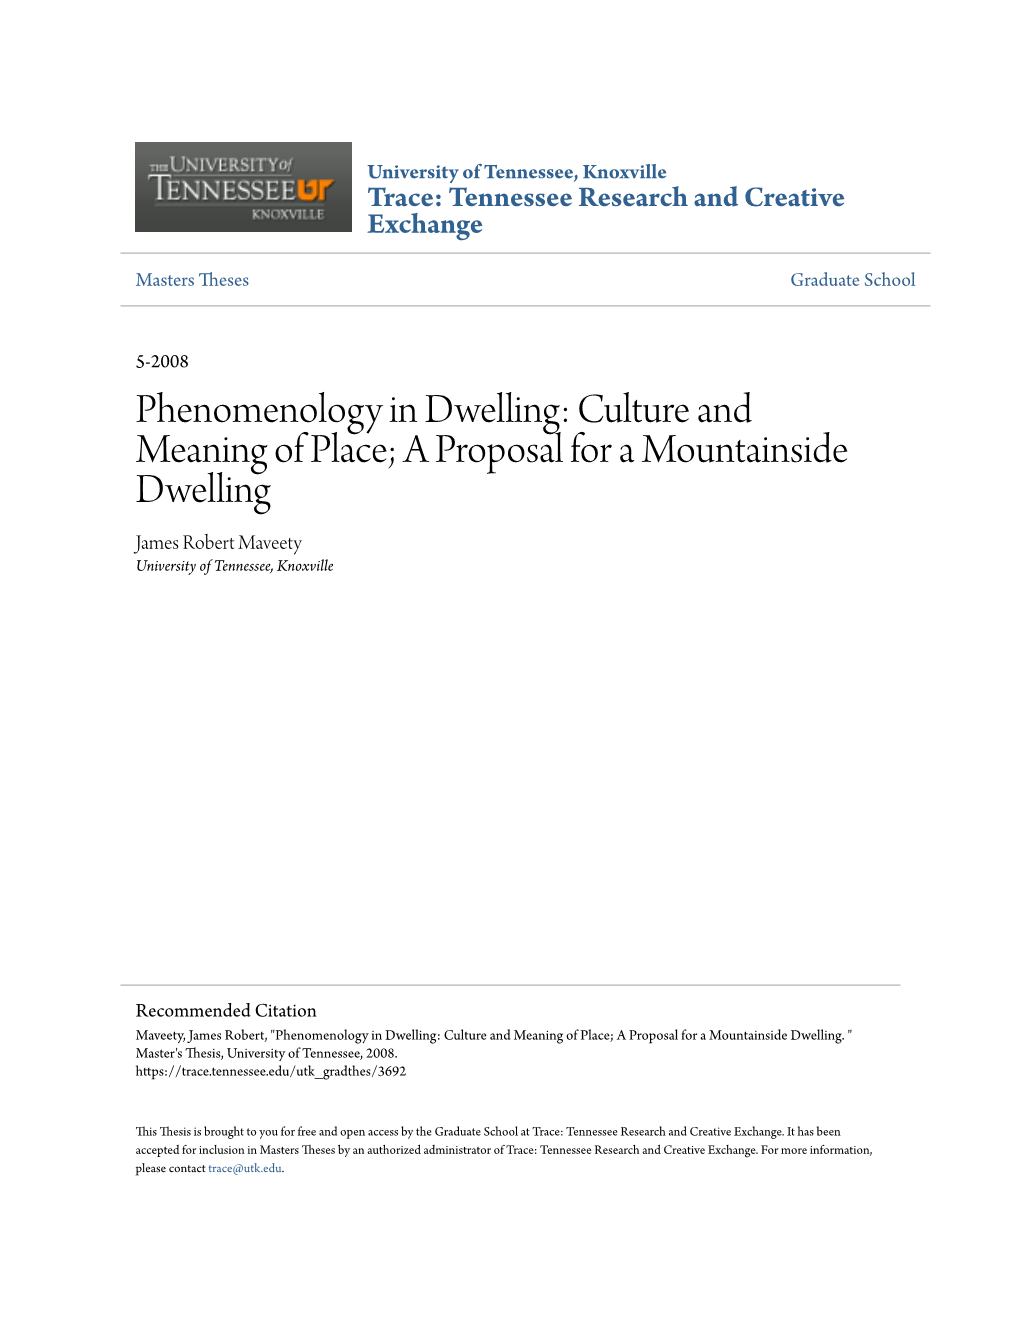 Phenomenology in Dwelling: Culture and Meaning of Place; a Proposal for a Mountainside Dwelling James Robert Maveety University of Tennessee, Knoxville